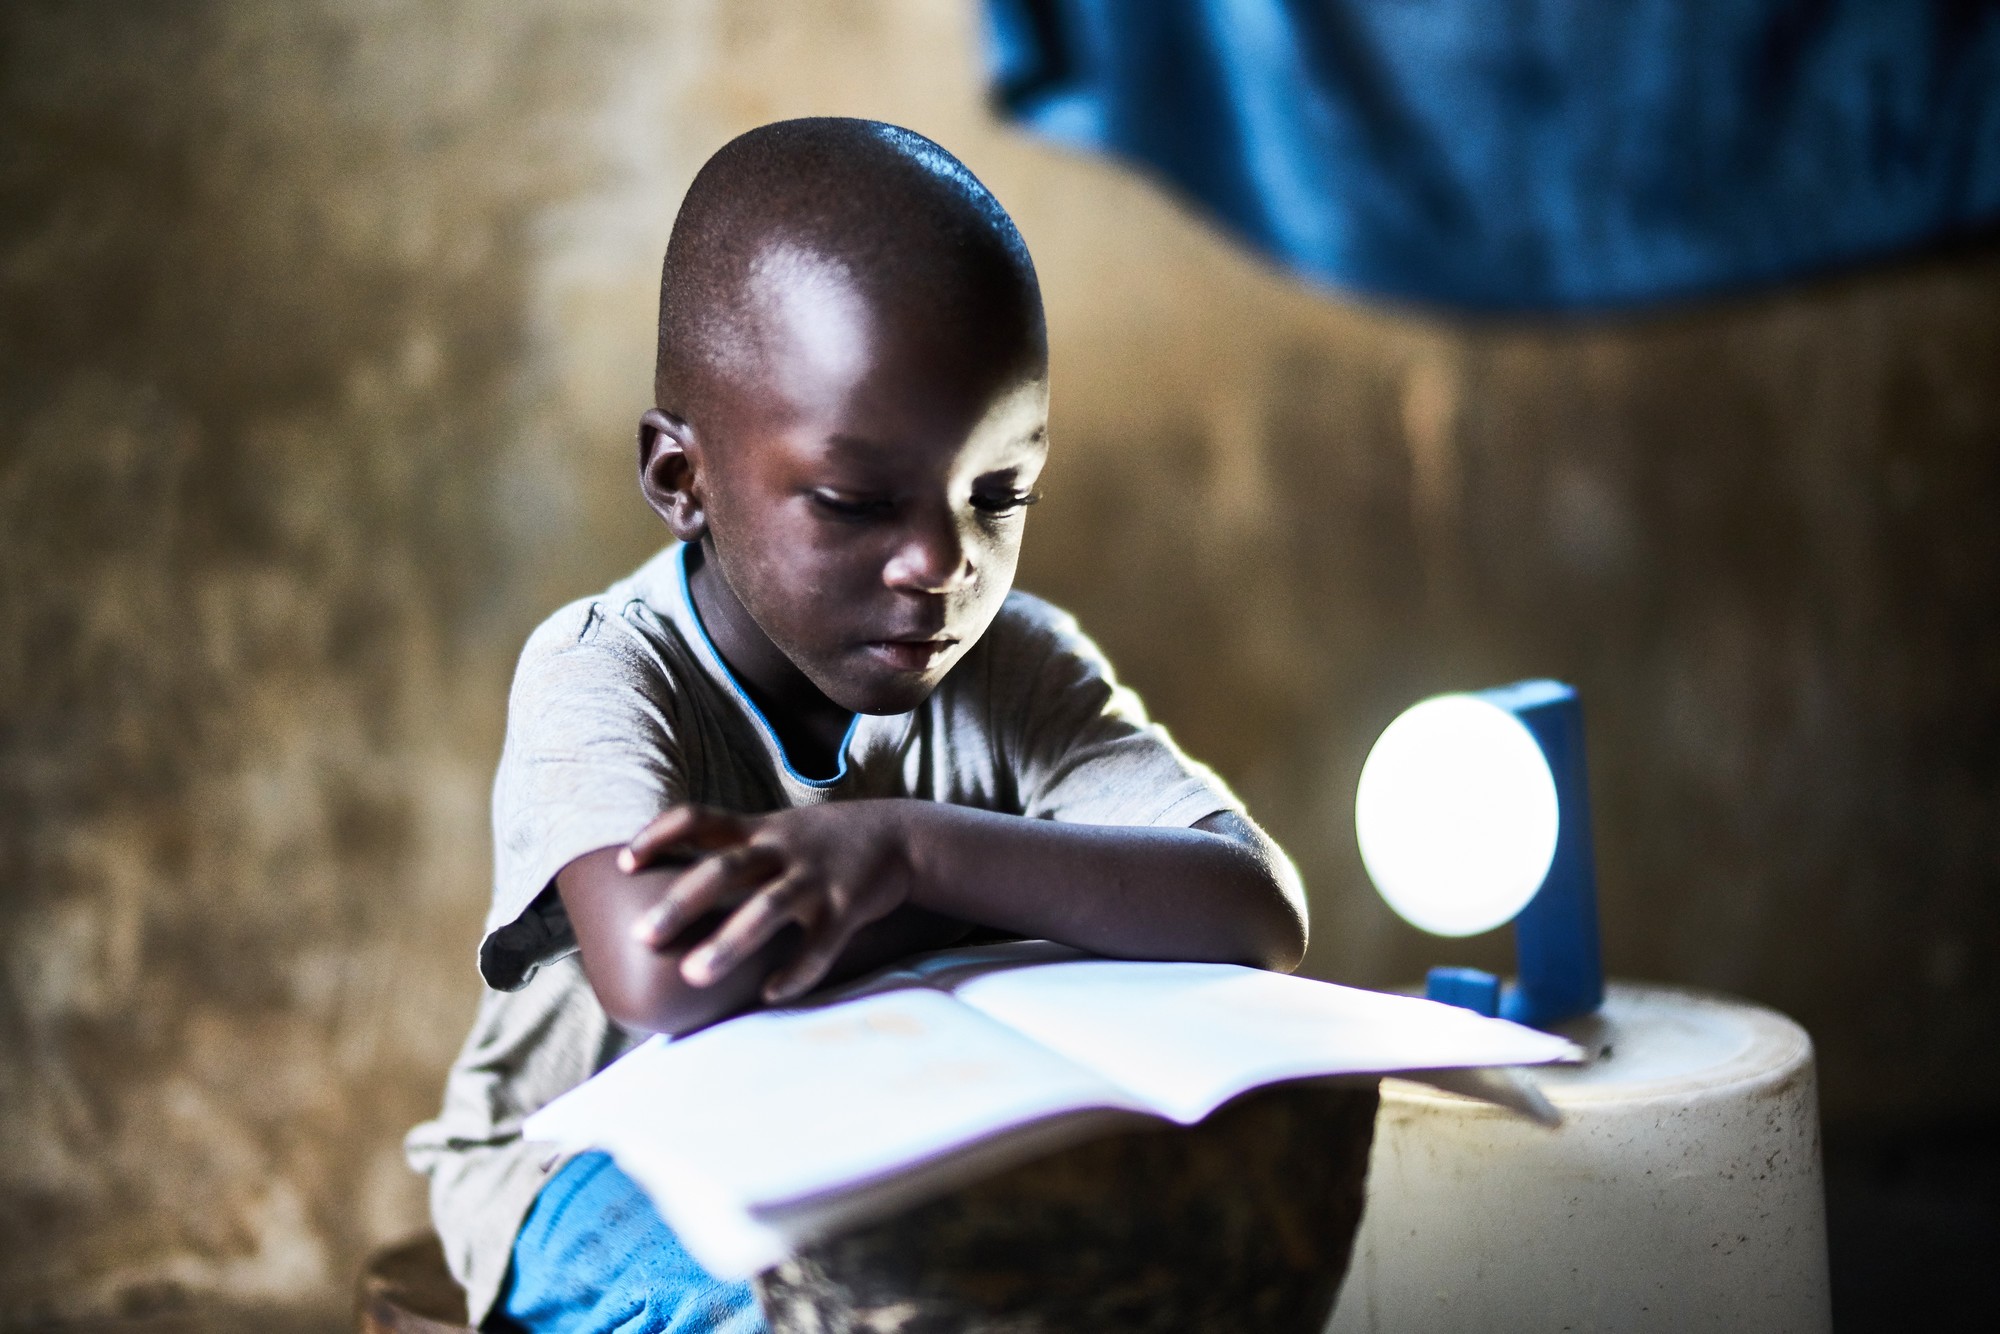 Young boy studying with handheld solar Natural Light lamp